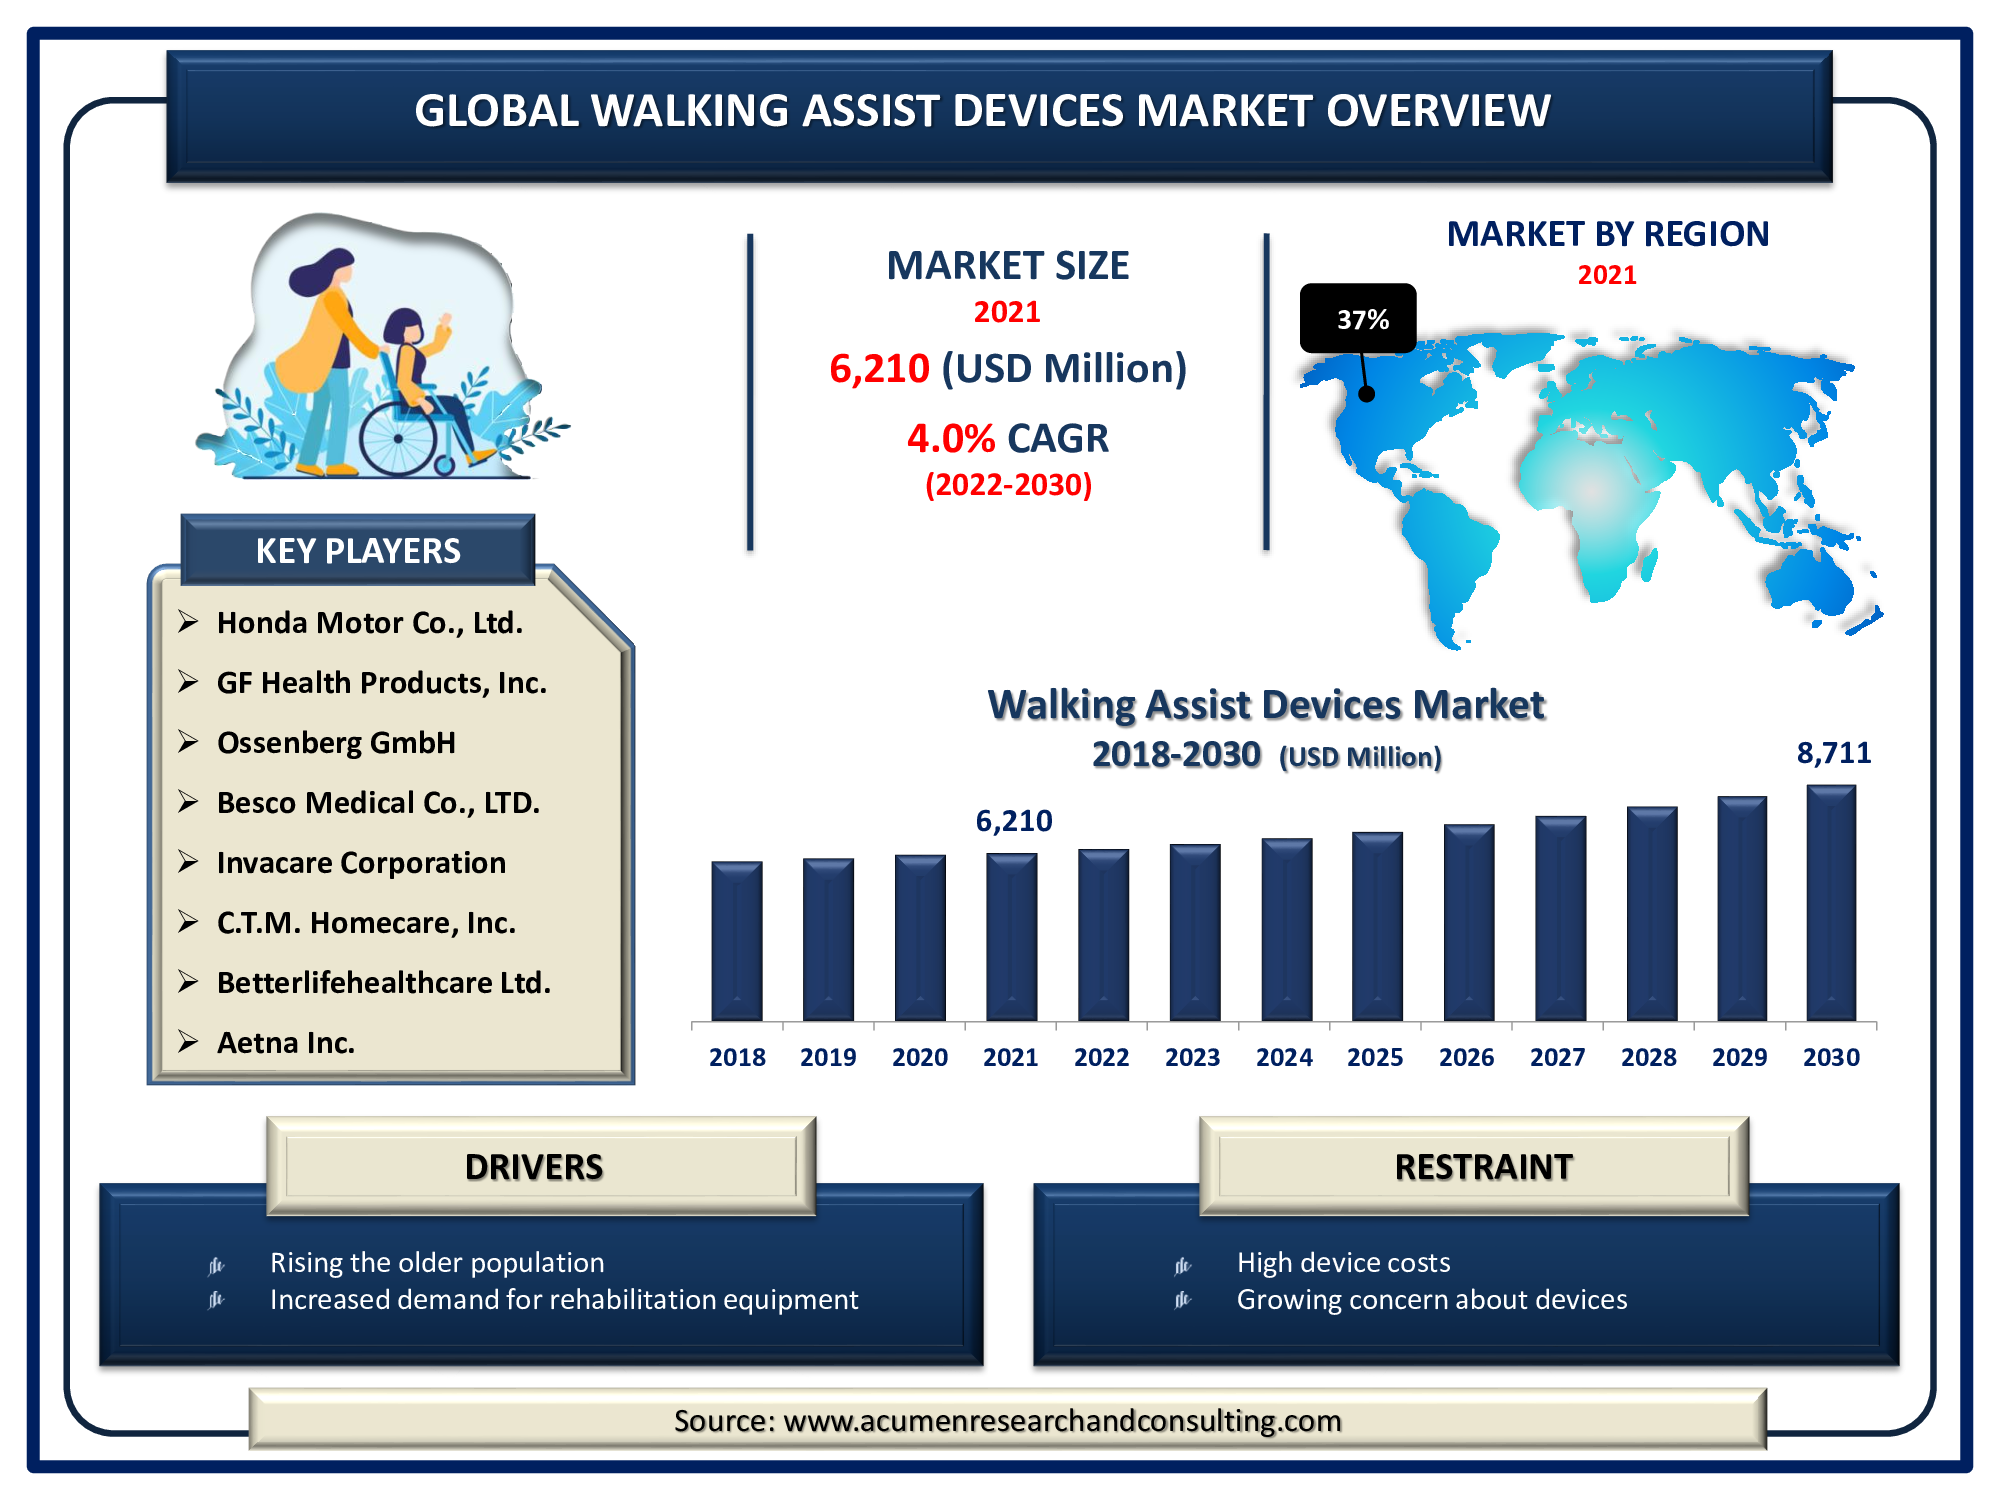 Walking Assist Devices Market accounted for USD 6,210 Million in 2021 and is expected to reach the market value of USD 8,711 Million by 2030 at a CAGR of 4.0% during the forecast period from 2022 to 2030.